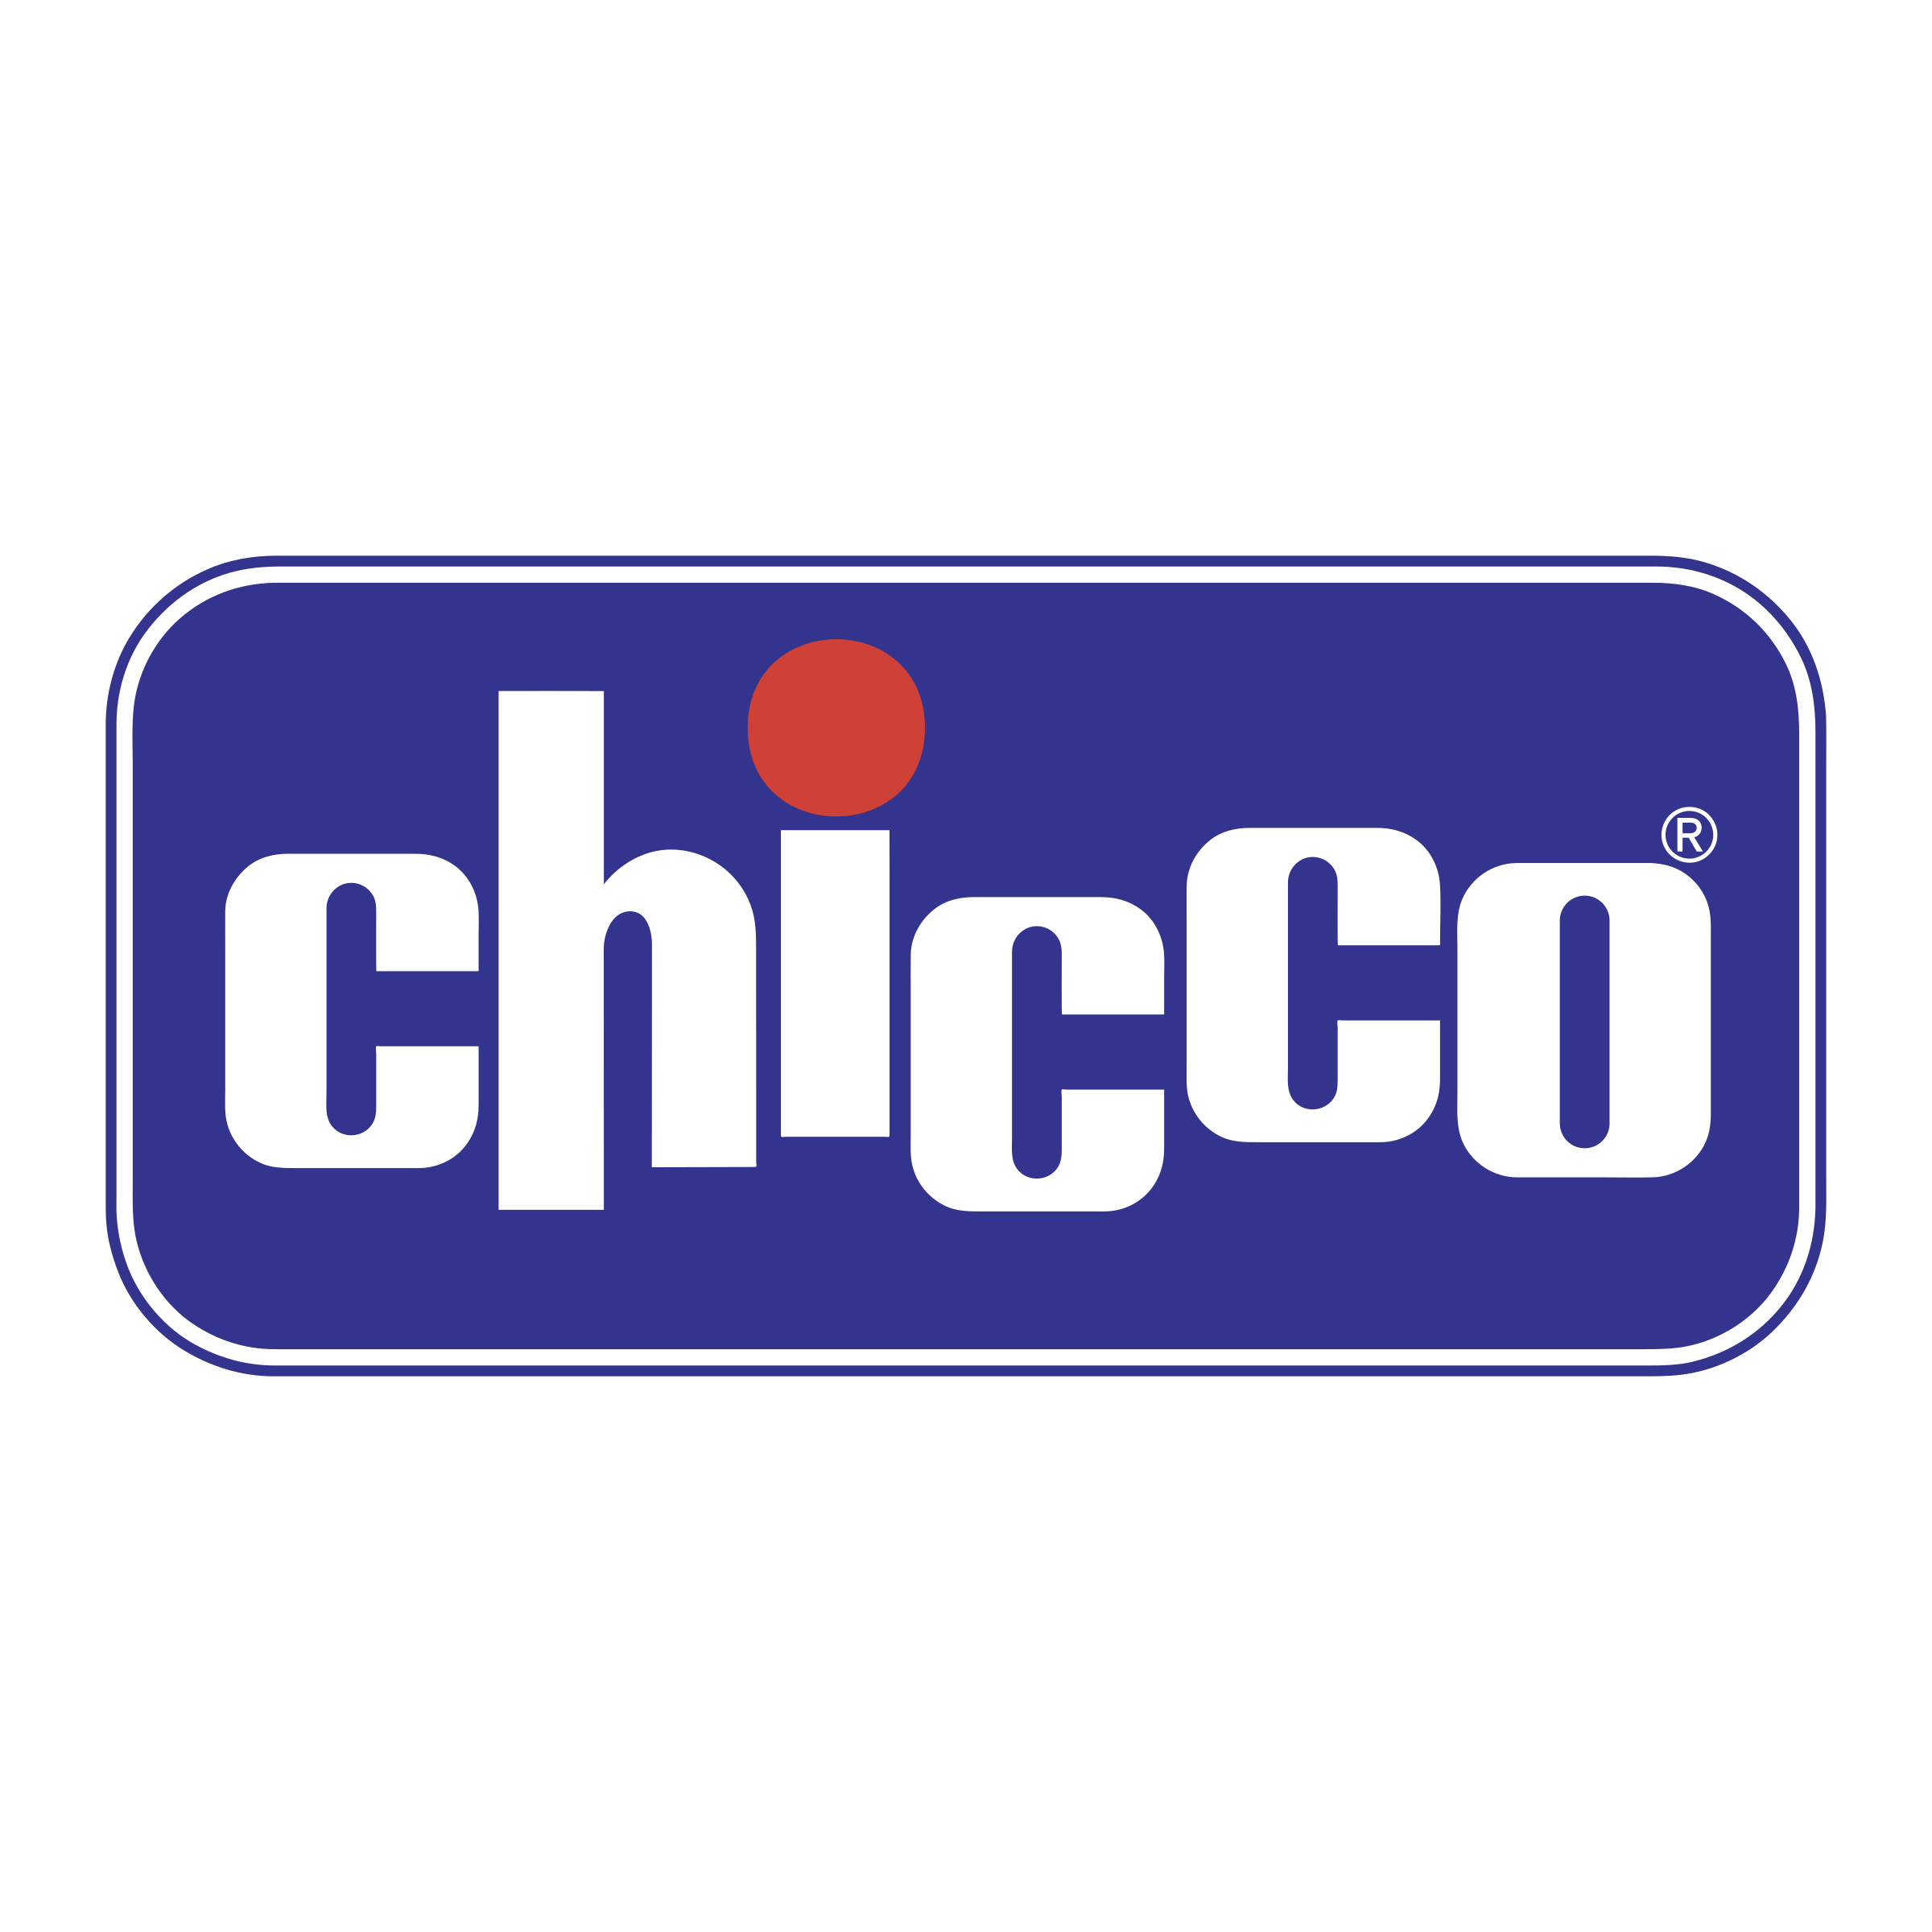 Chicco Logo - Chicco Logo PNG Transparent & SVG Vector - Freebie Supply